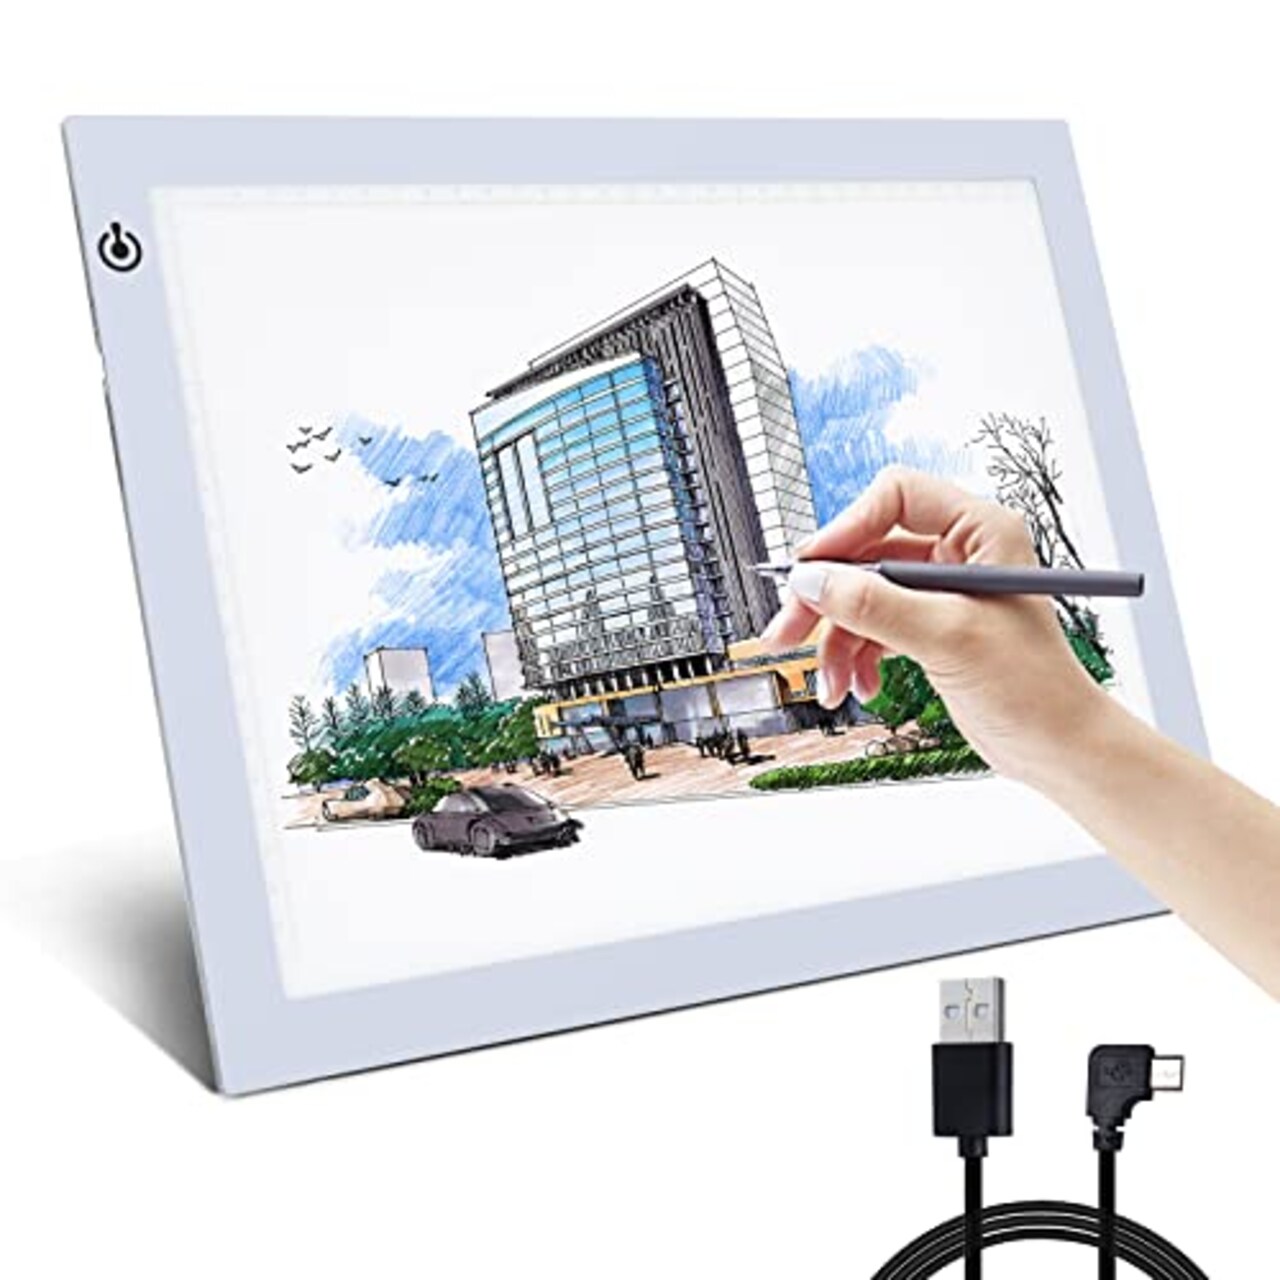 A4 Silver LED Trace Light Pad NXENTC Light Table USB Power LED Tracing Light  Board for Artists,Drawing, Sketching, Animation